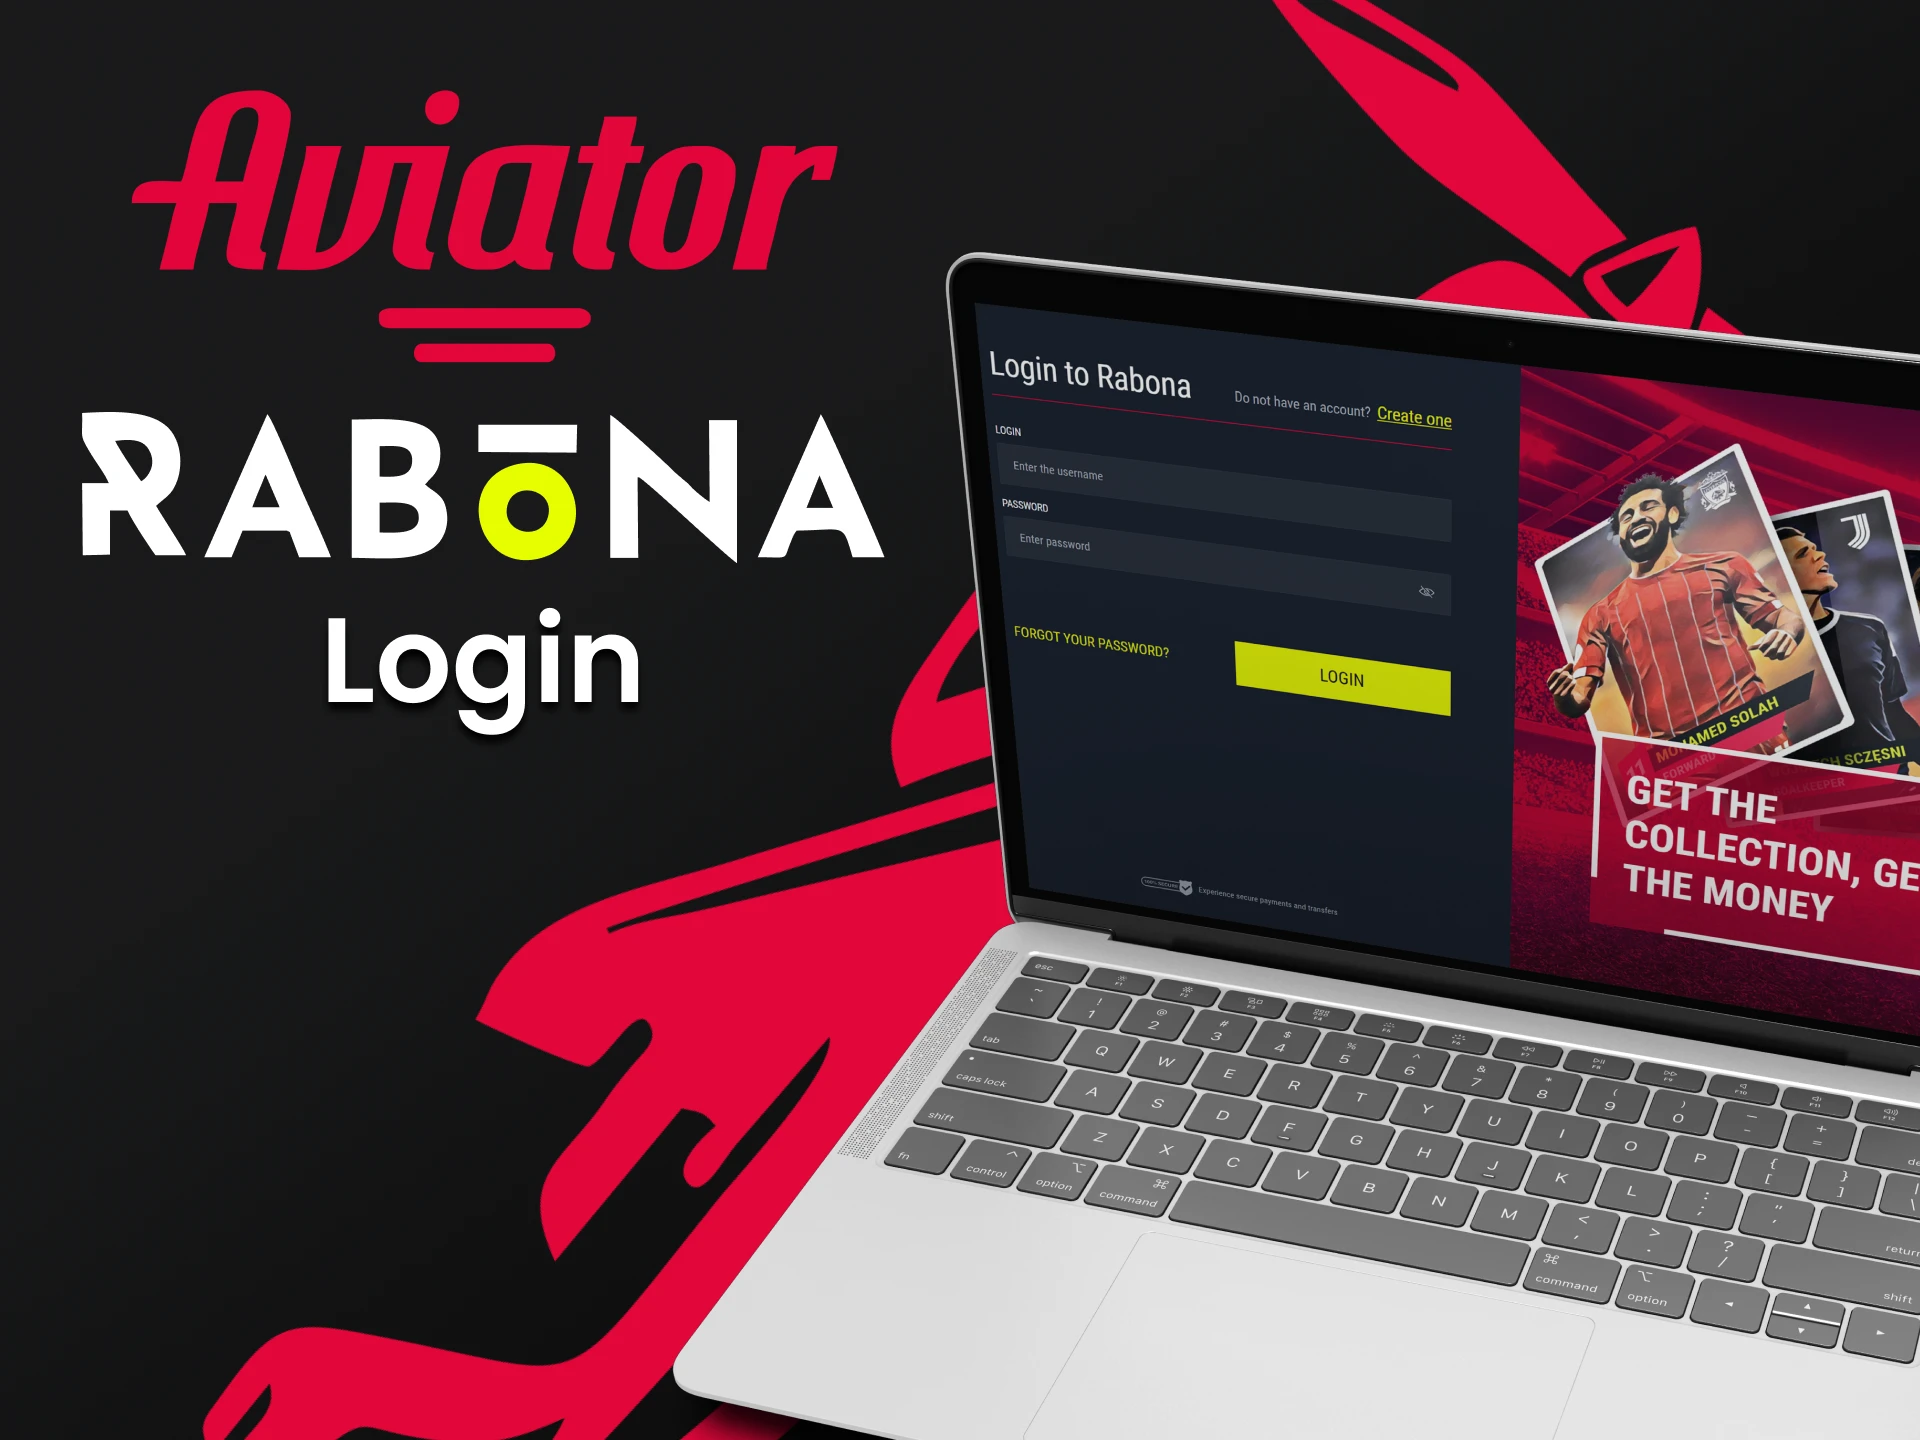 If you have a Rabona account, you need to login to play Aviator.